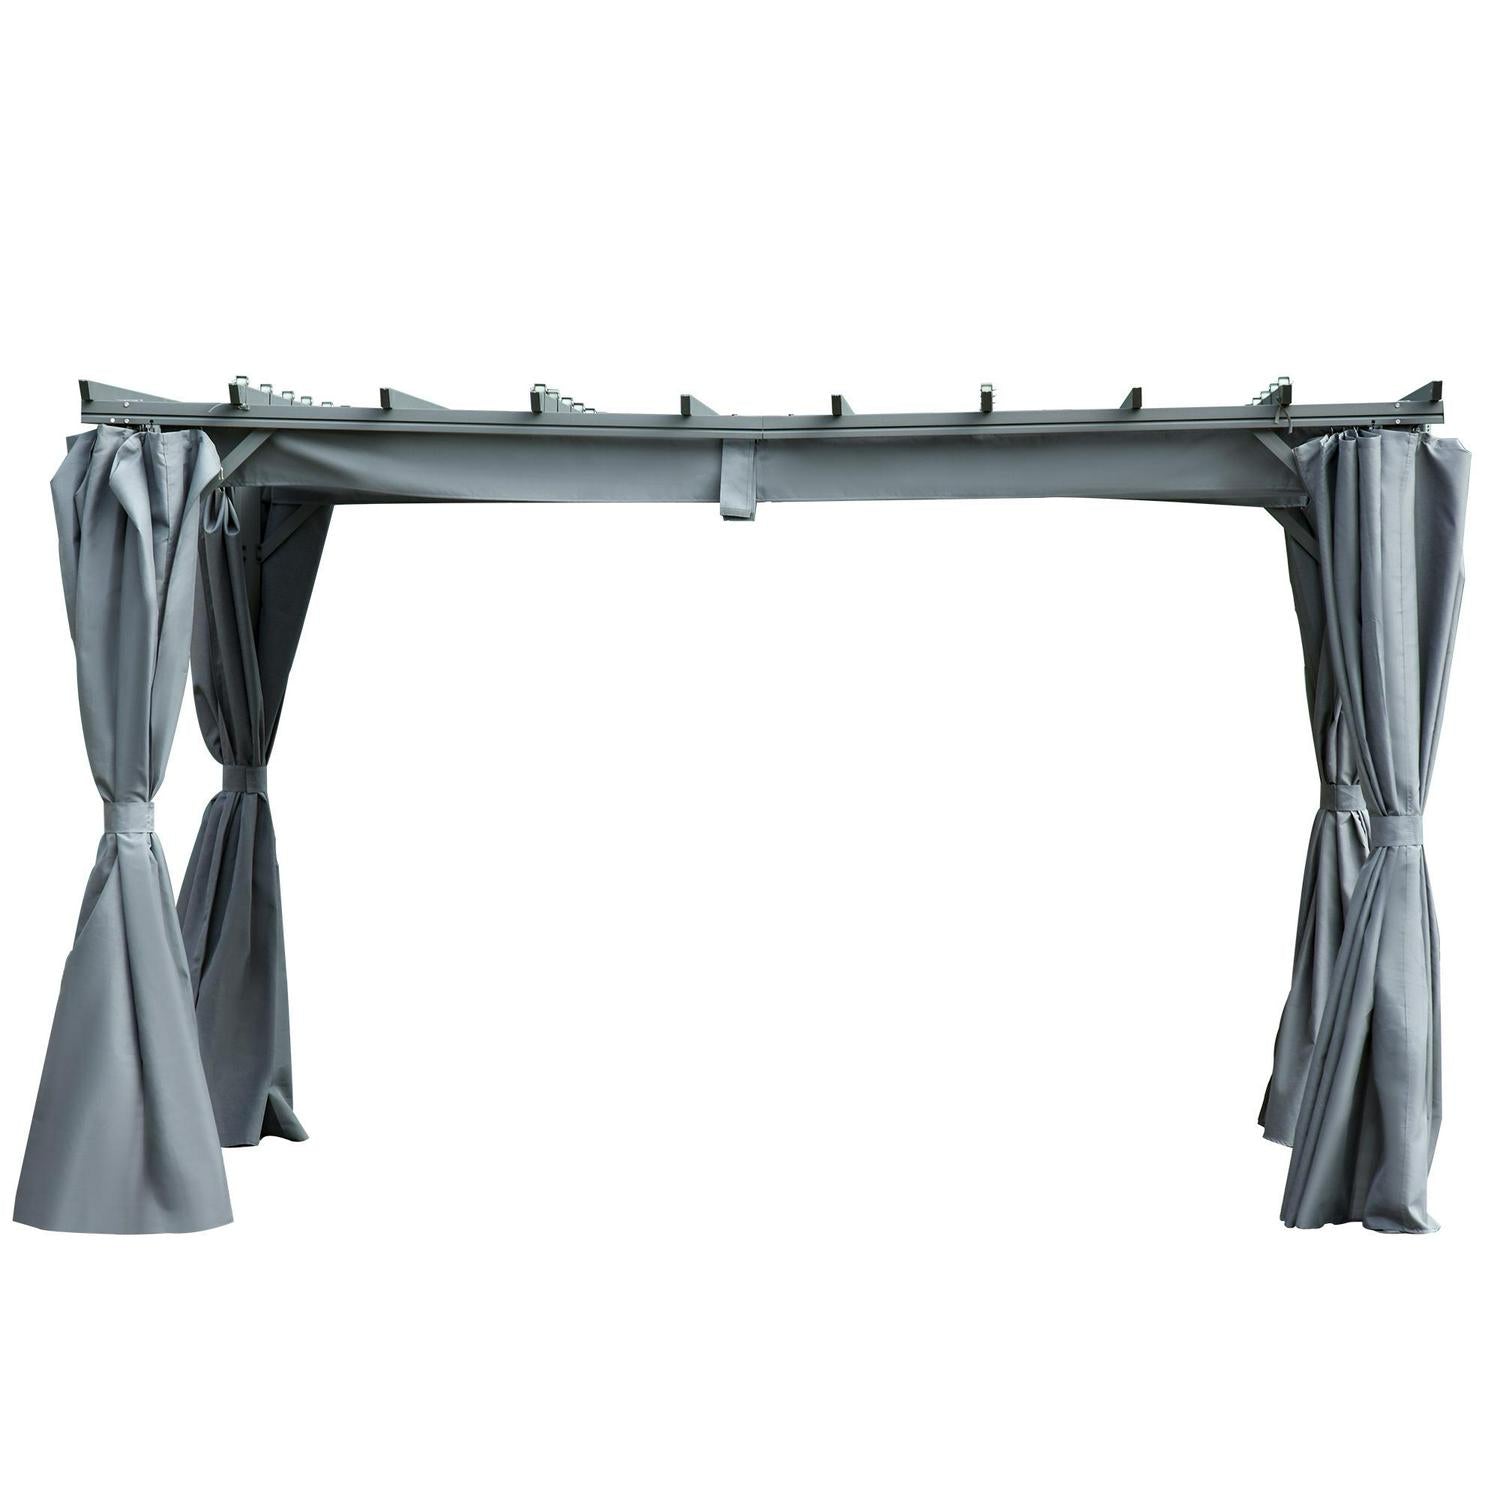 Outdoor Pergola With Retractable Roof And Curtains- Dark Grey